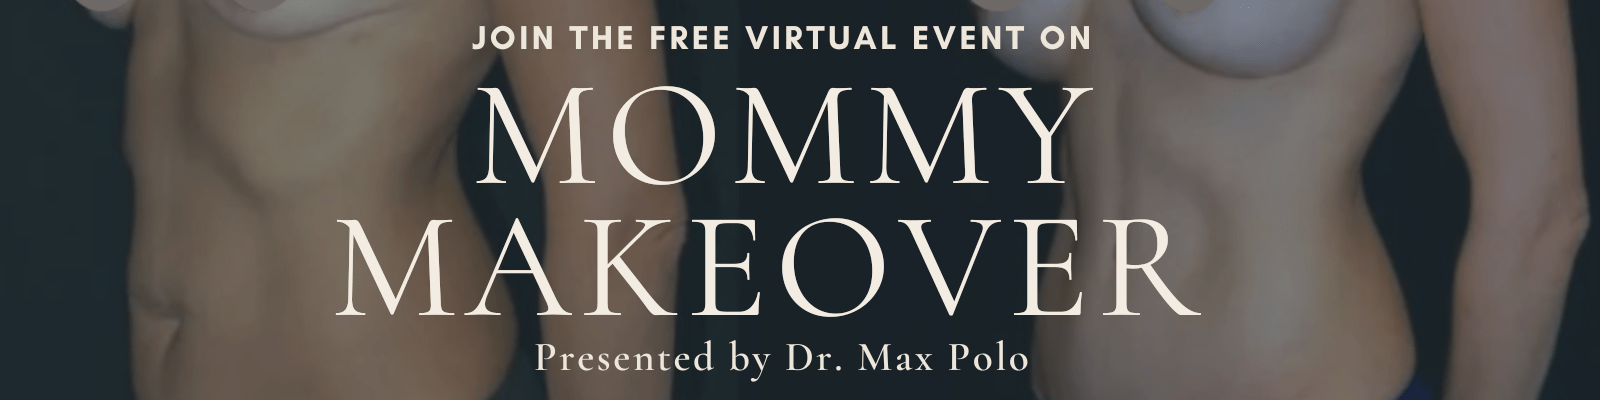 Join the Free Virtual Event on Mommy Makeover Presented by Dr Max Polo